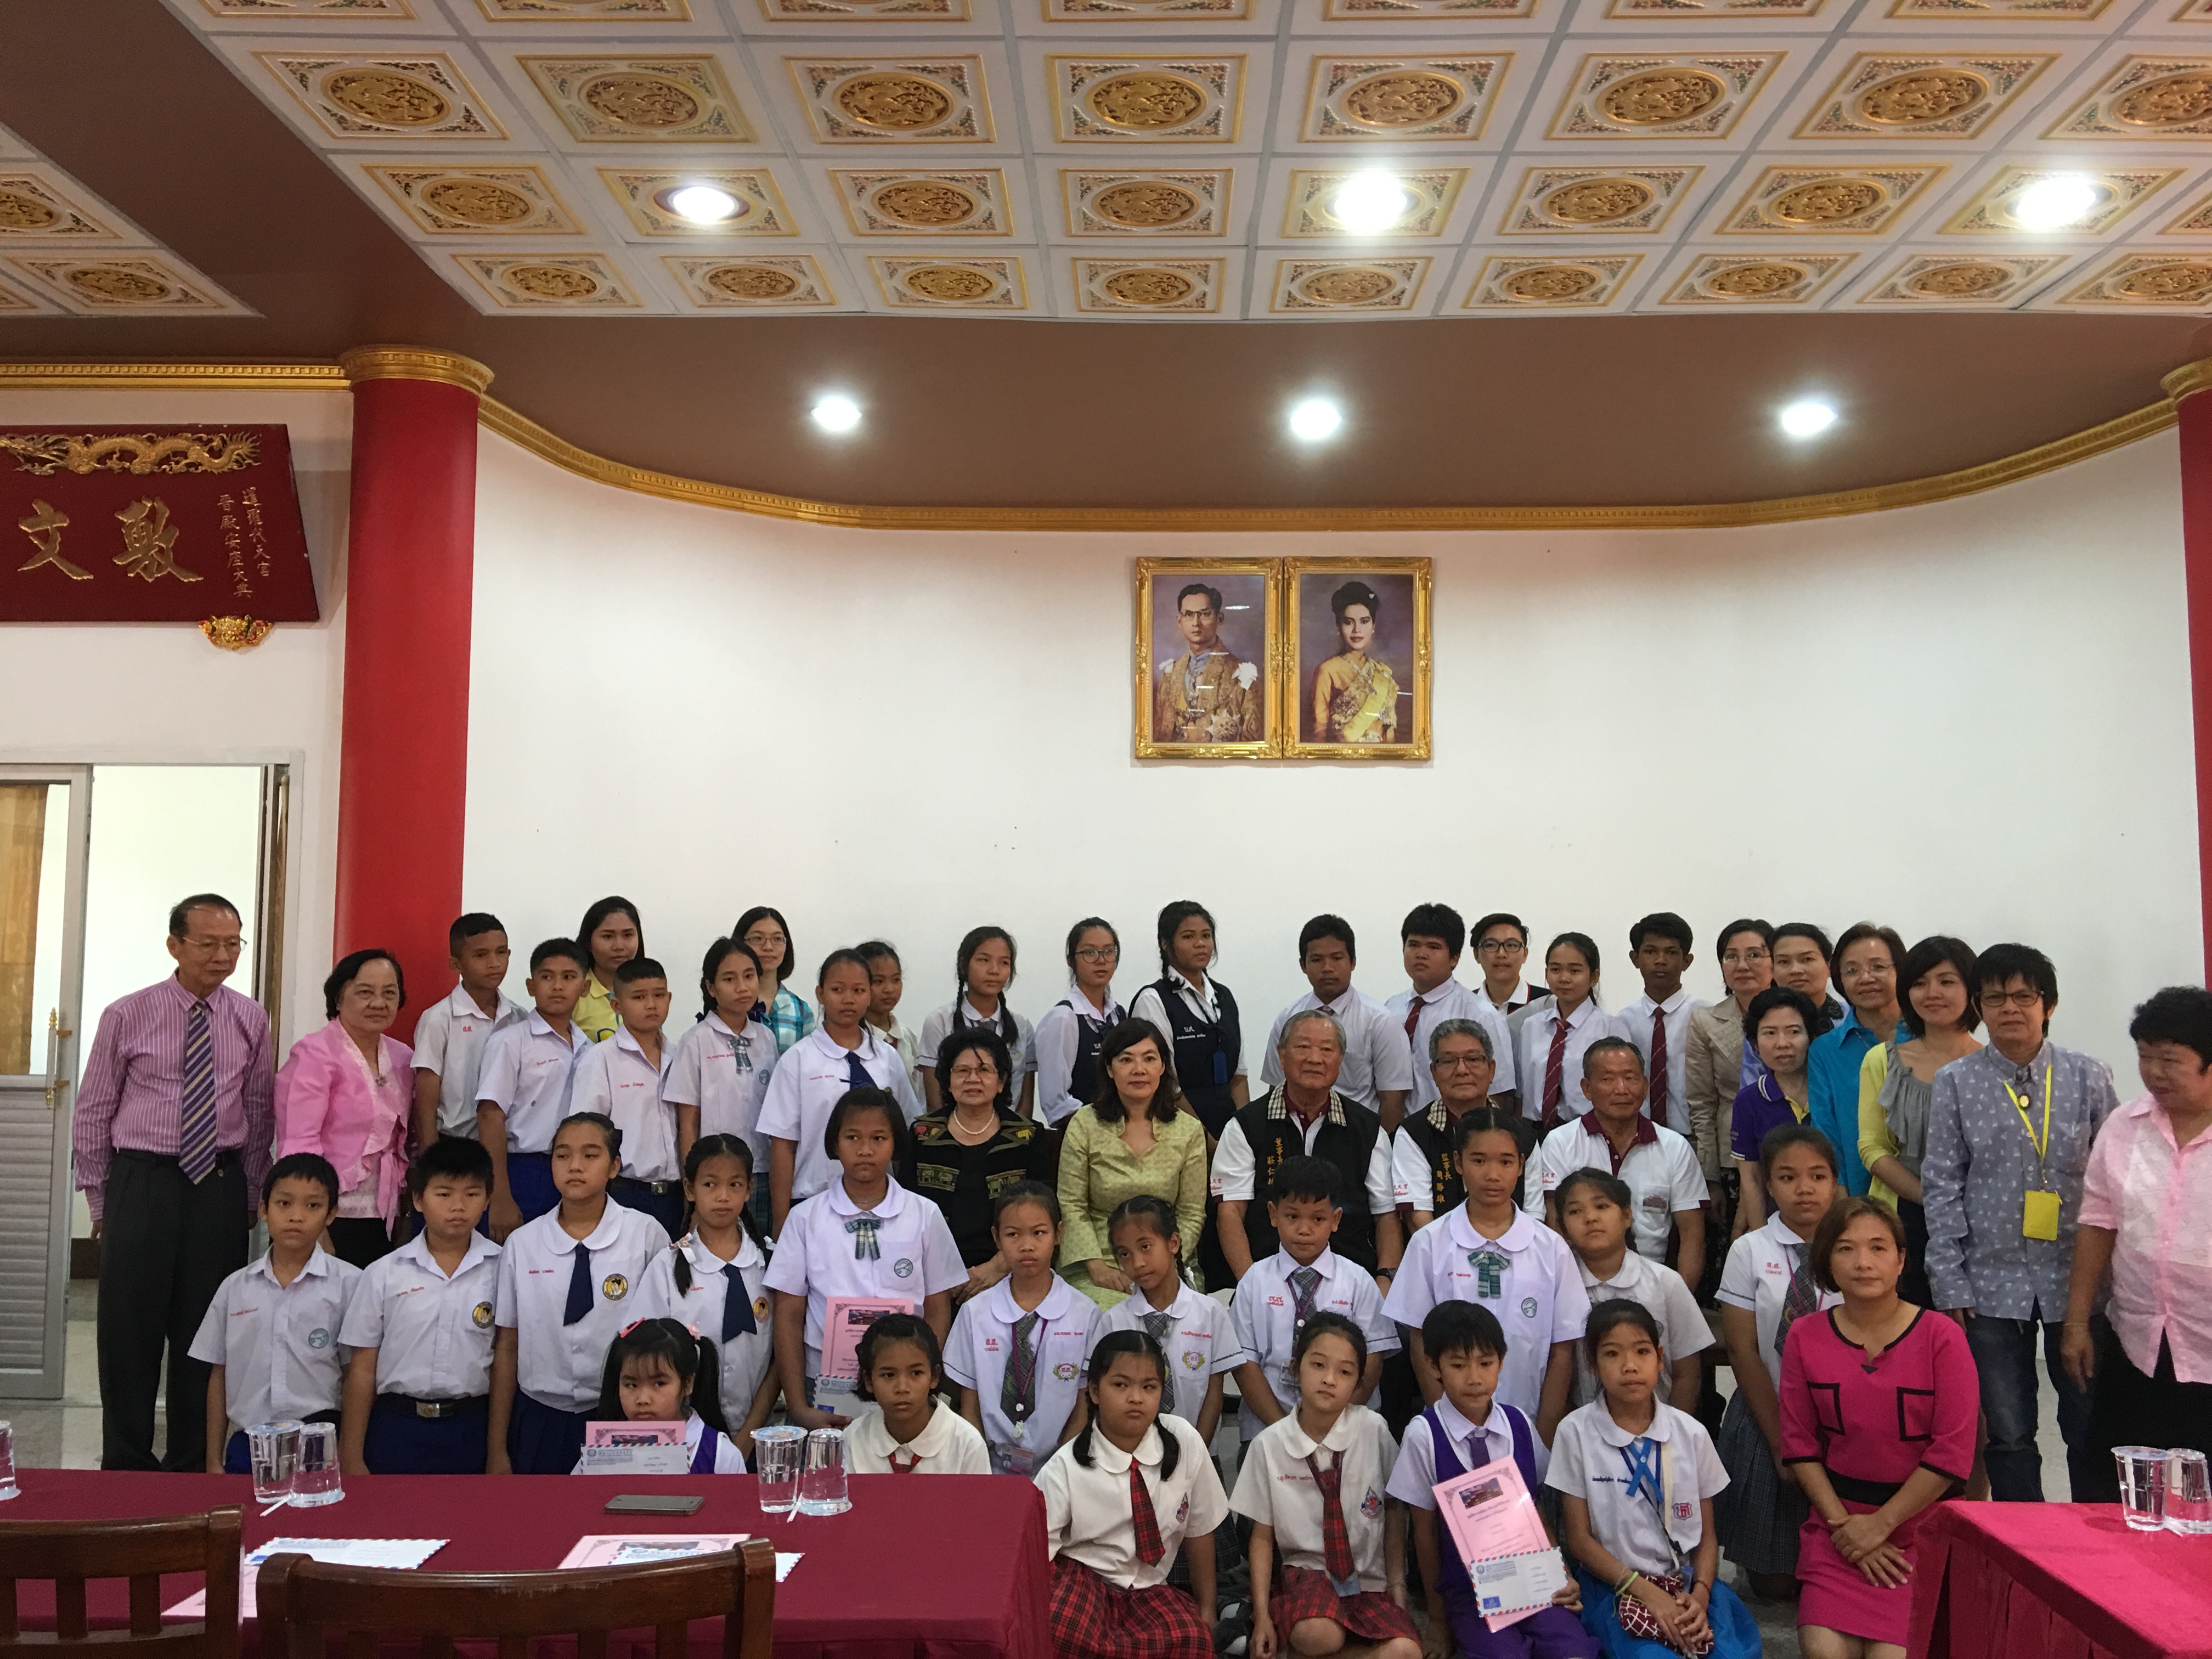 Dai Tian Temple in Thailand Awards 30 Scholarships for Excellence in Huayu to Thai Students